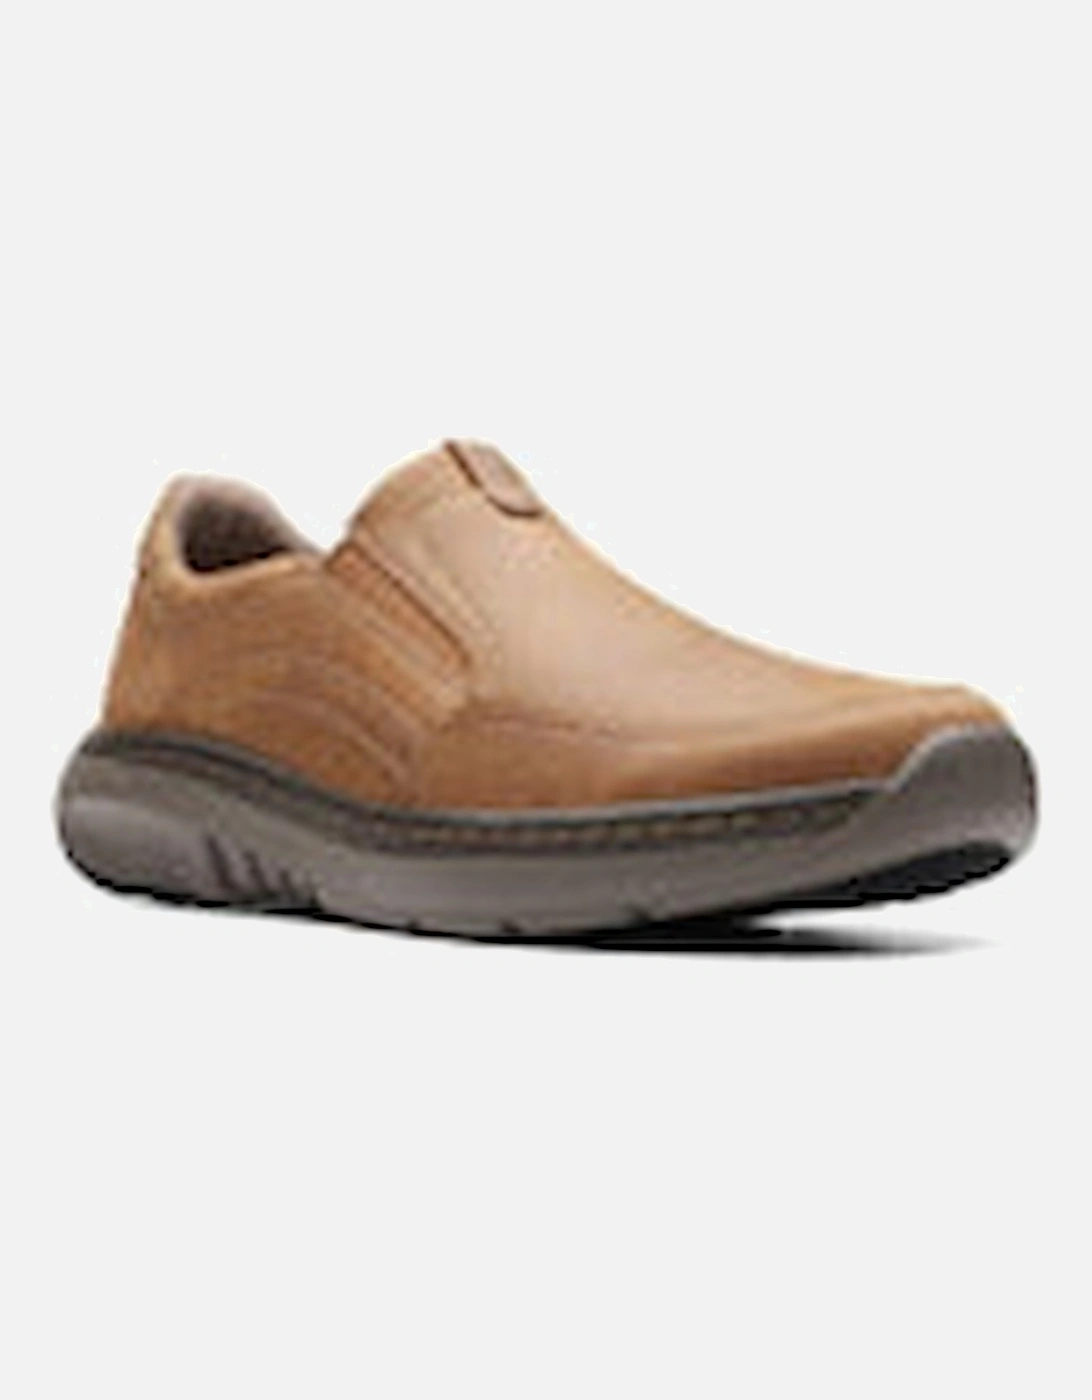 Mens slip on shoe Clarkspro Step in Beeswax Leather, 5 of 4